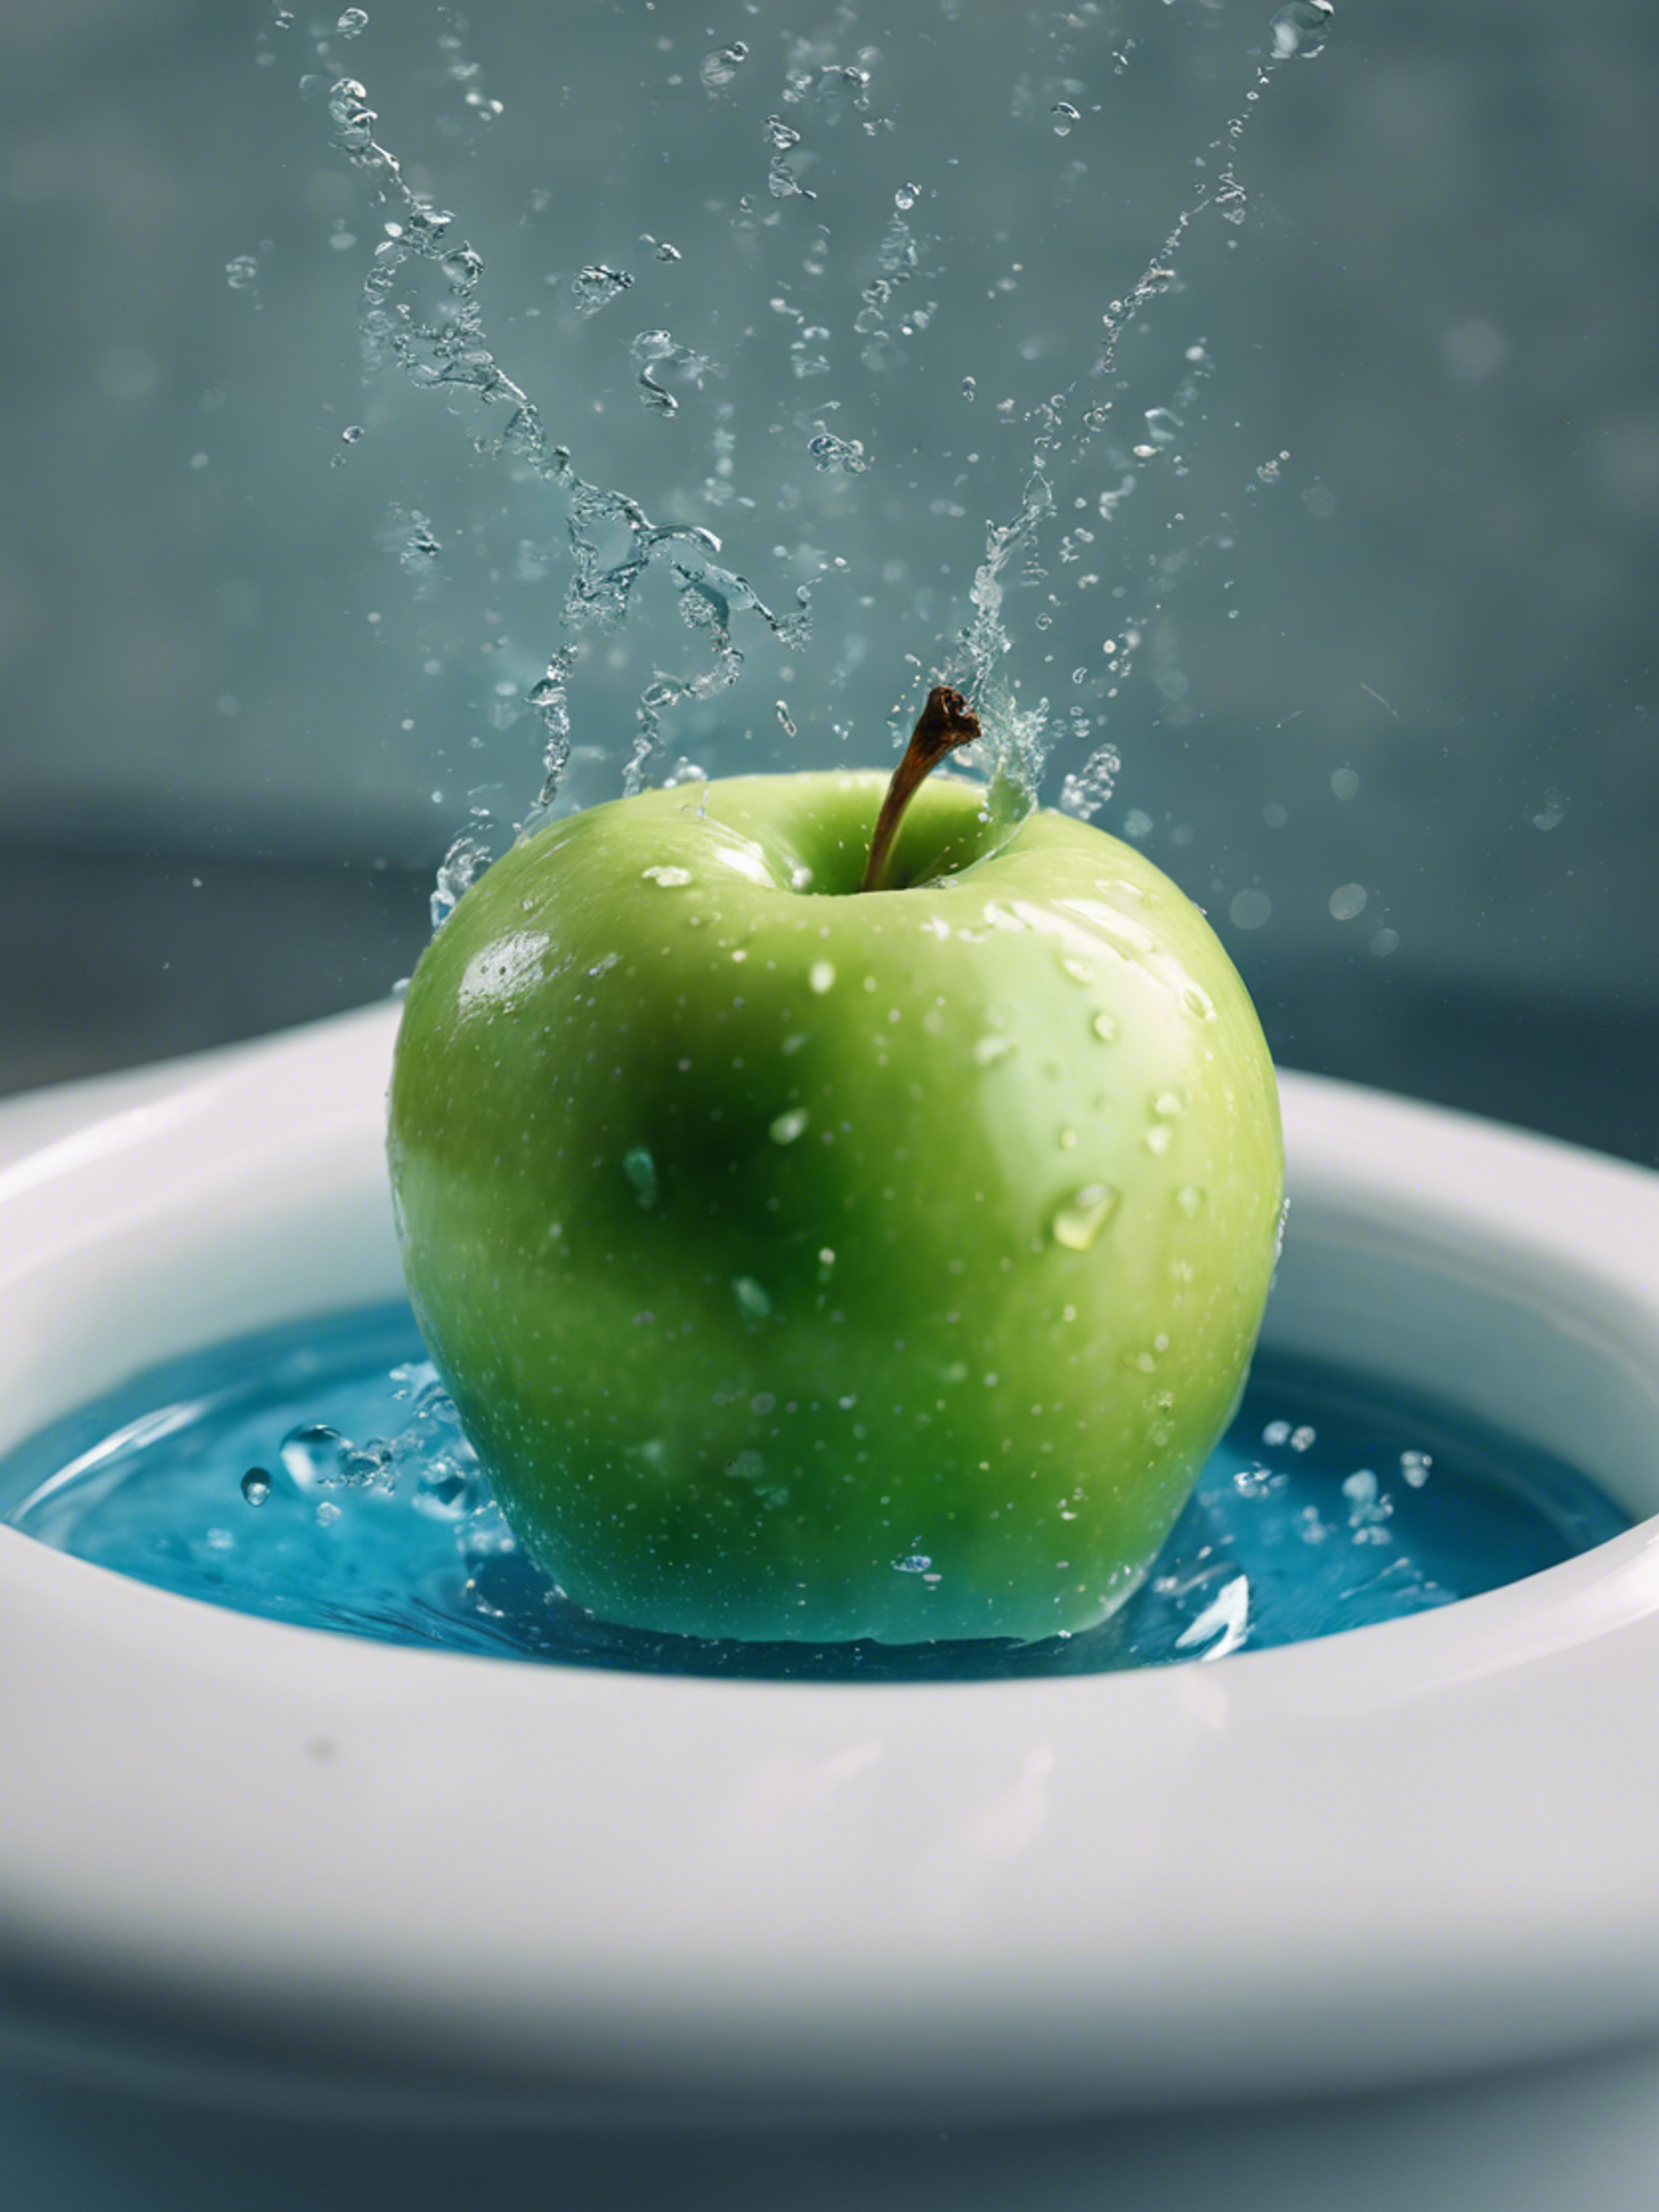 A green apple falling into a basin filled with azure blue water. Tapeta na zeď[a9bb5407cd4a4f929343]